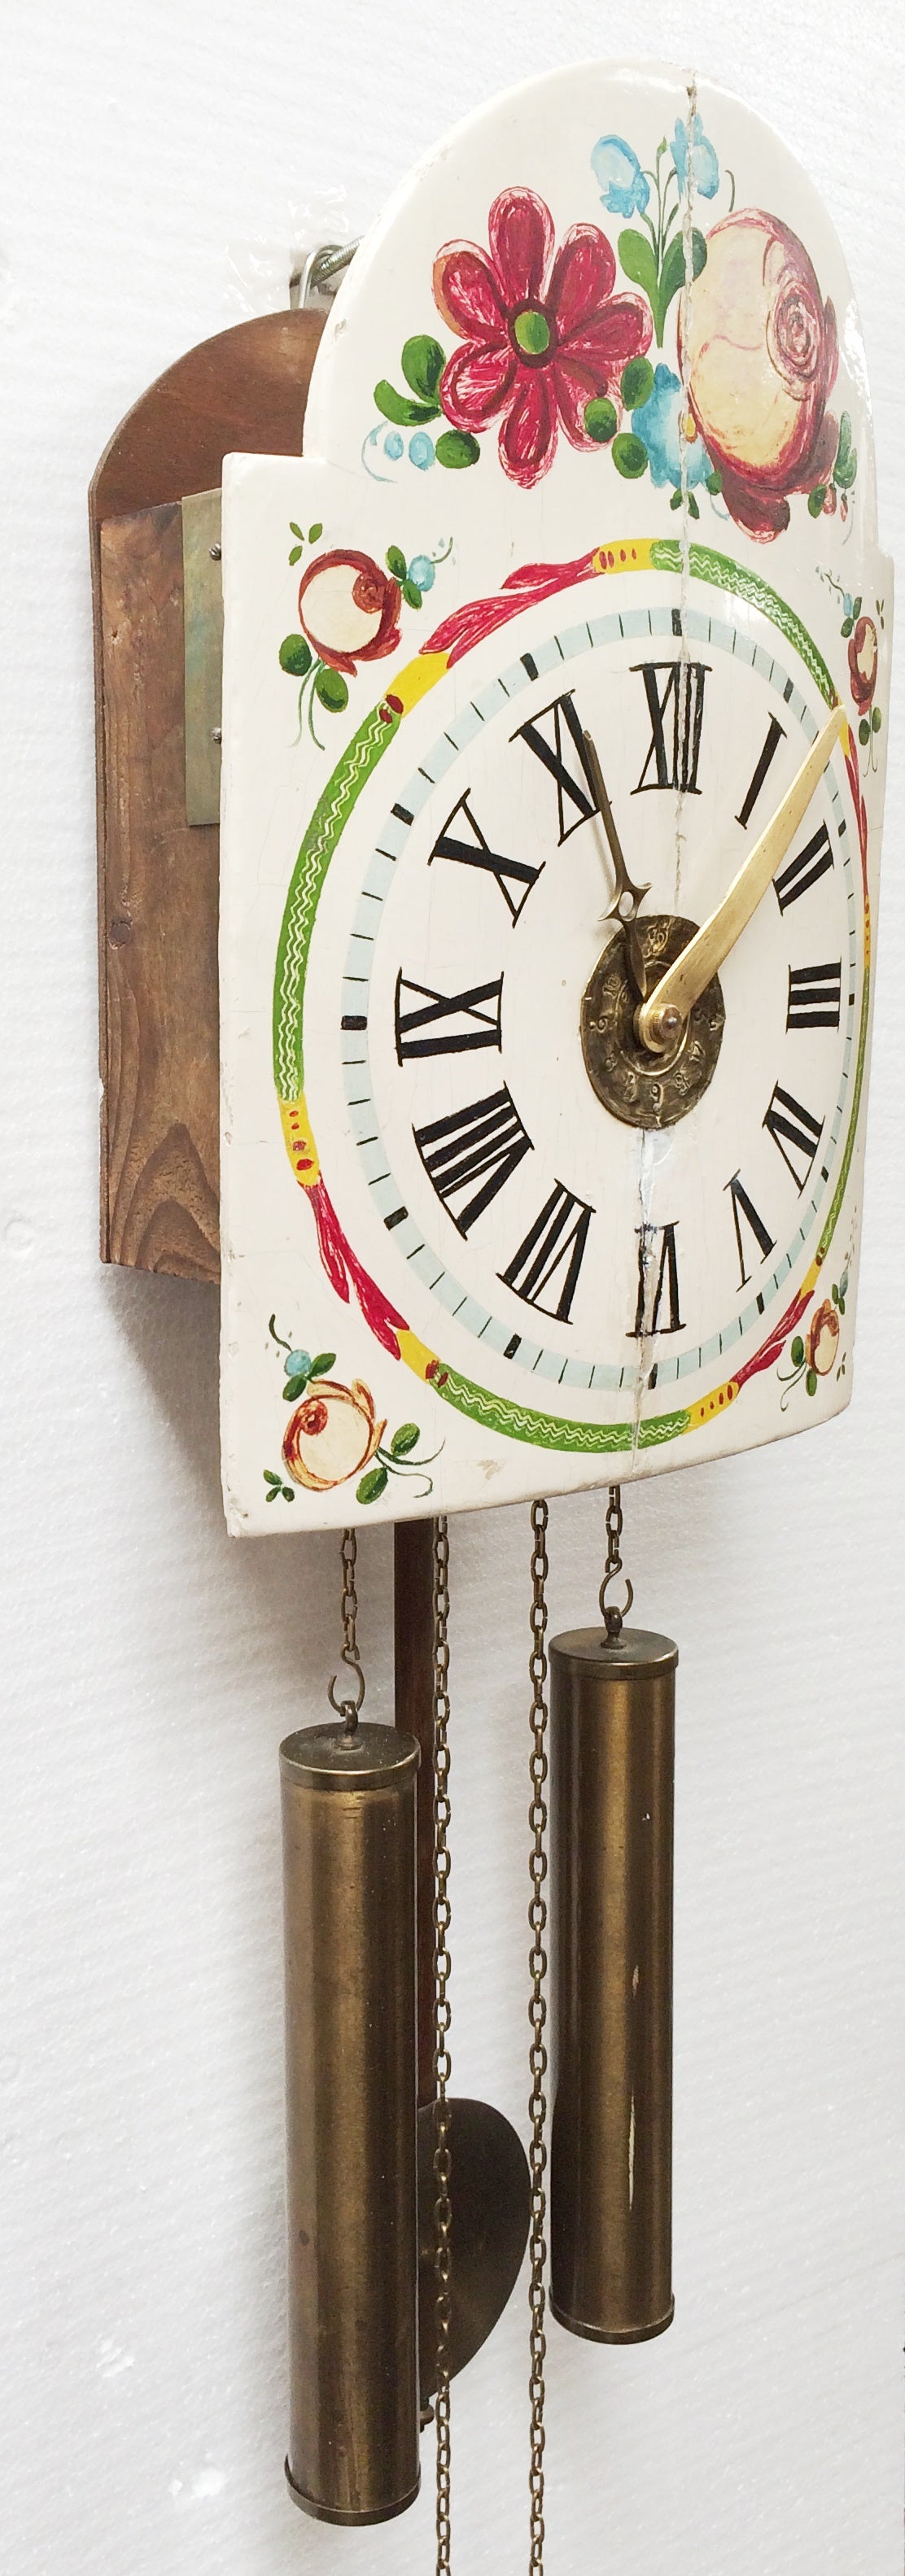 Antique ODIN Pendulum Chime Wall Clock | eXibit collection